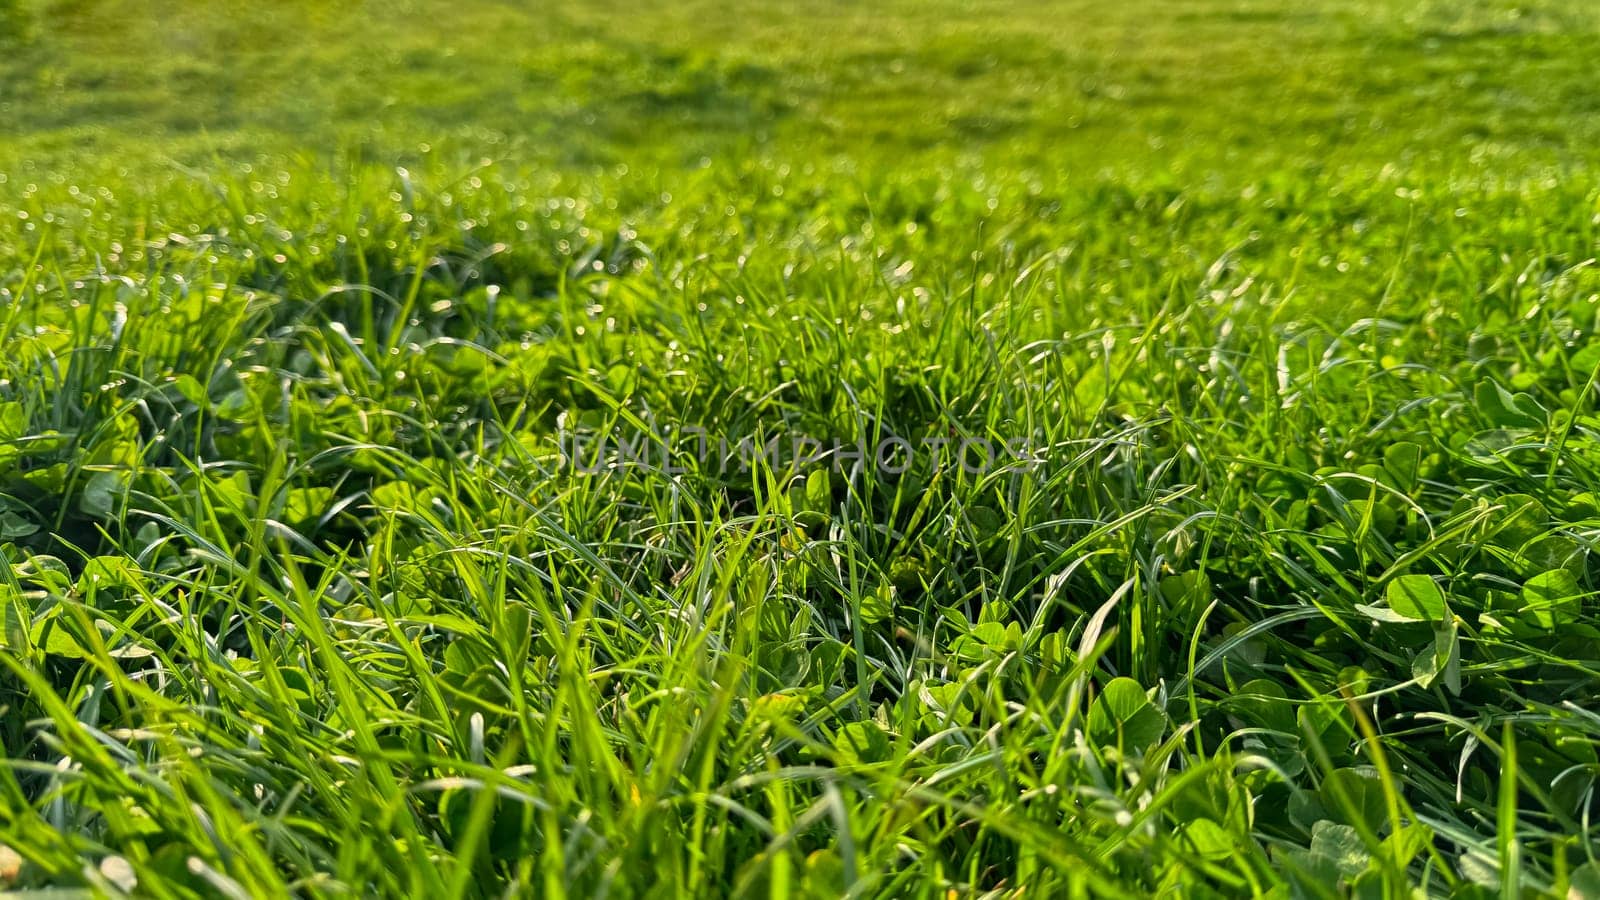 Background natural fresh green grass and clover leaves close up. Luminous dewy lawn, spring freshness, nature detail with morning light concept for design and print. High quality photo